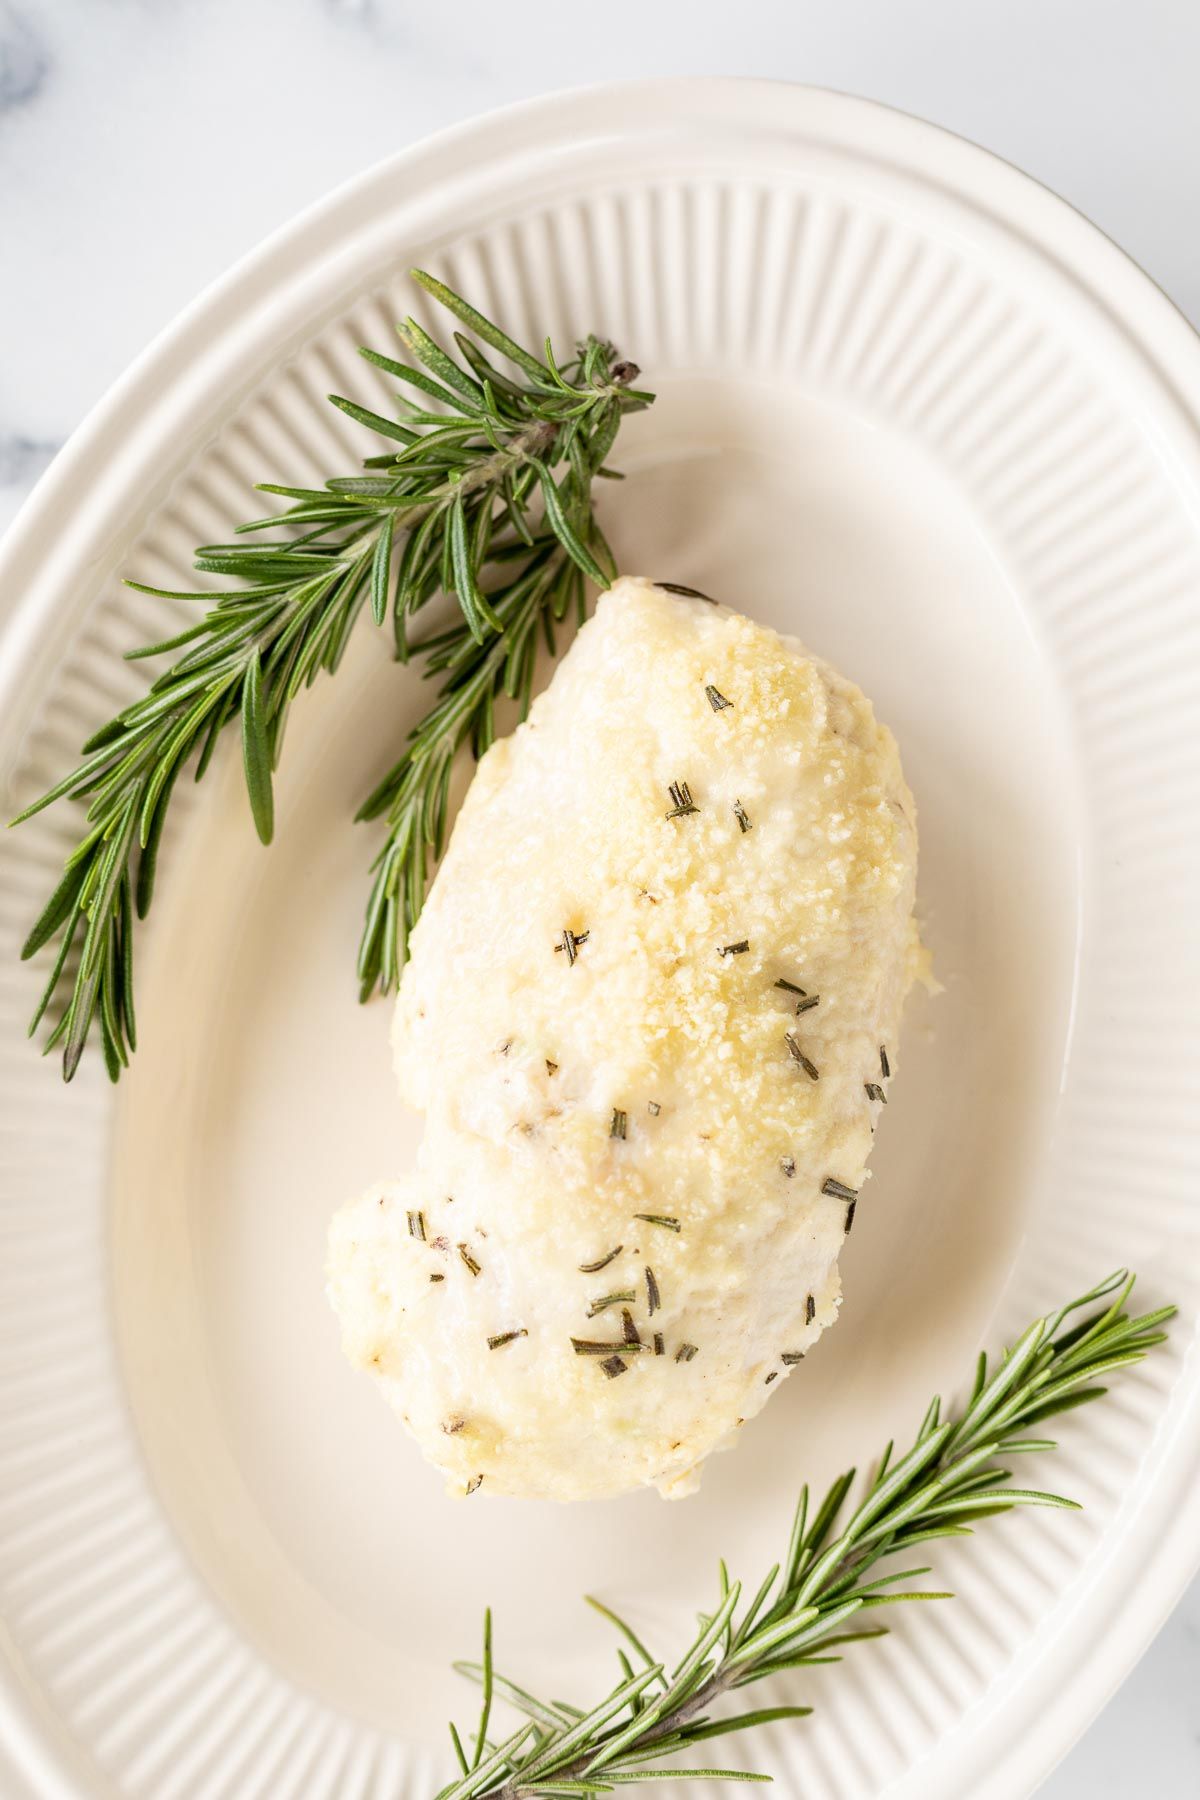 Mayo chicken, garnished with fresh rosemary on an oval platter.